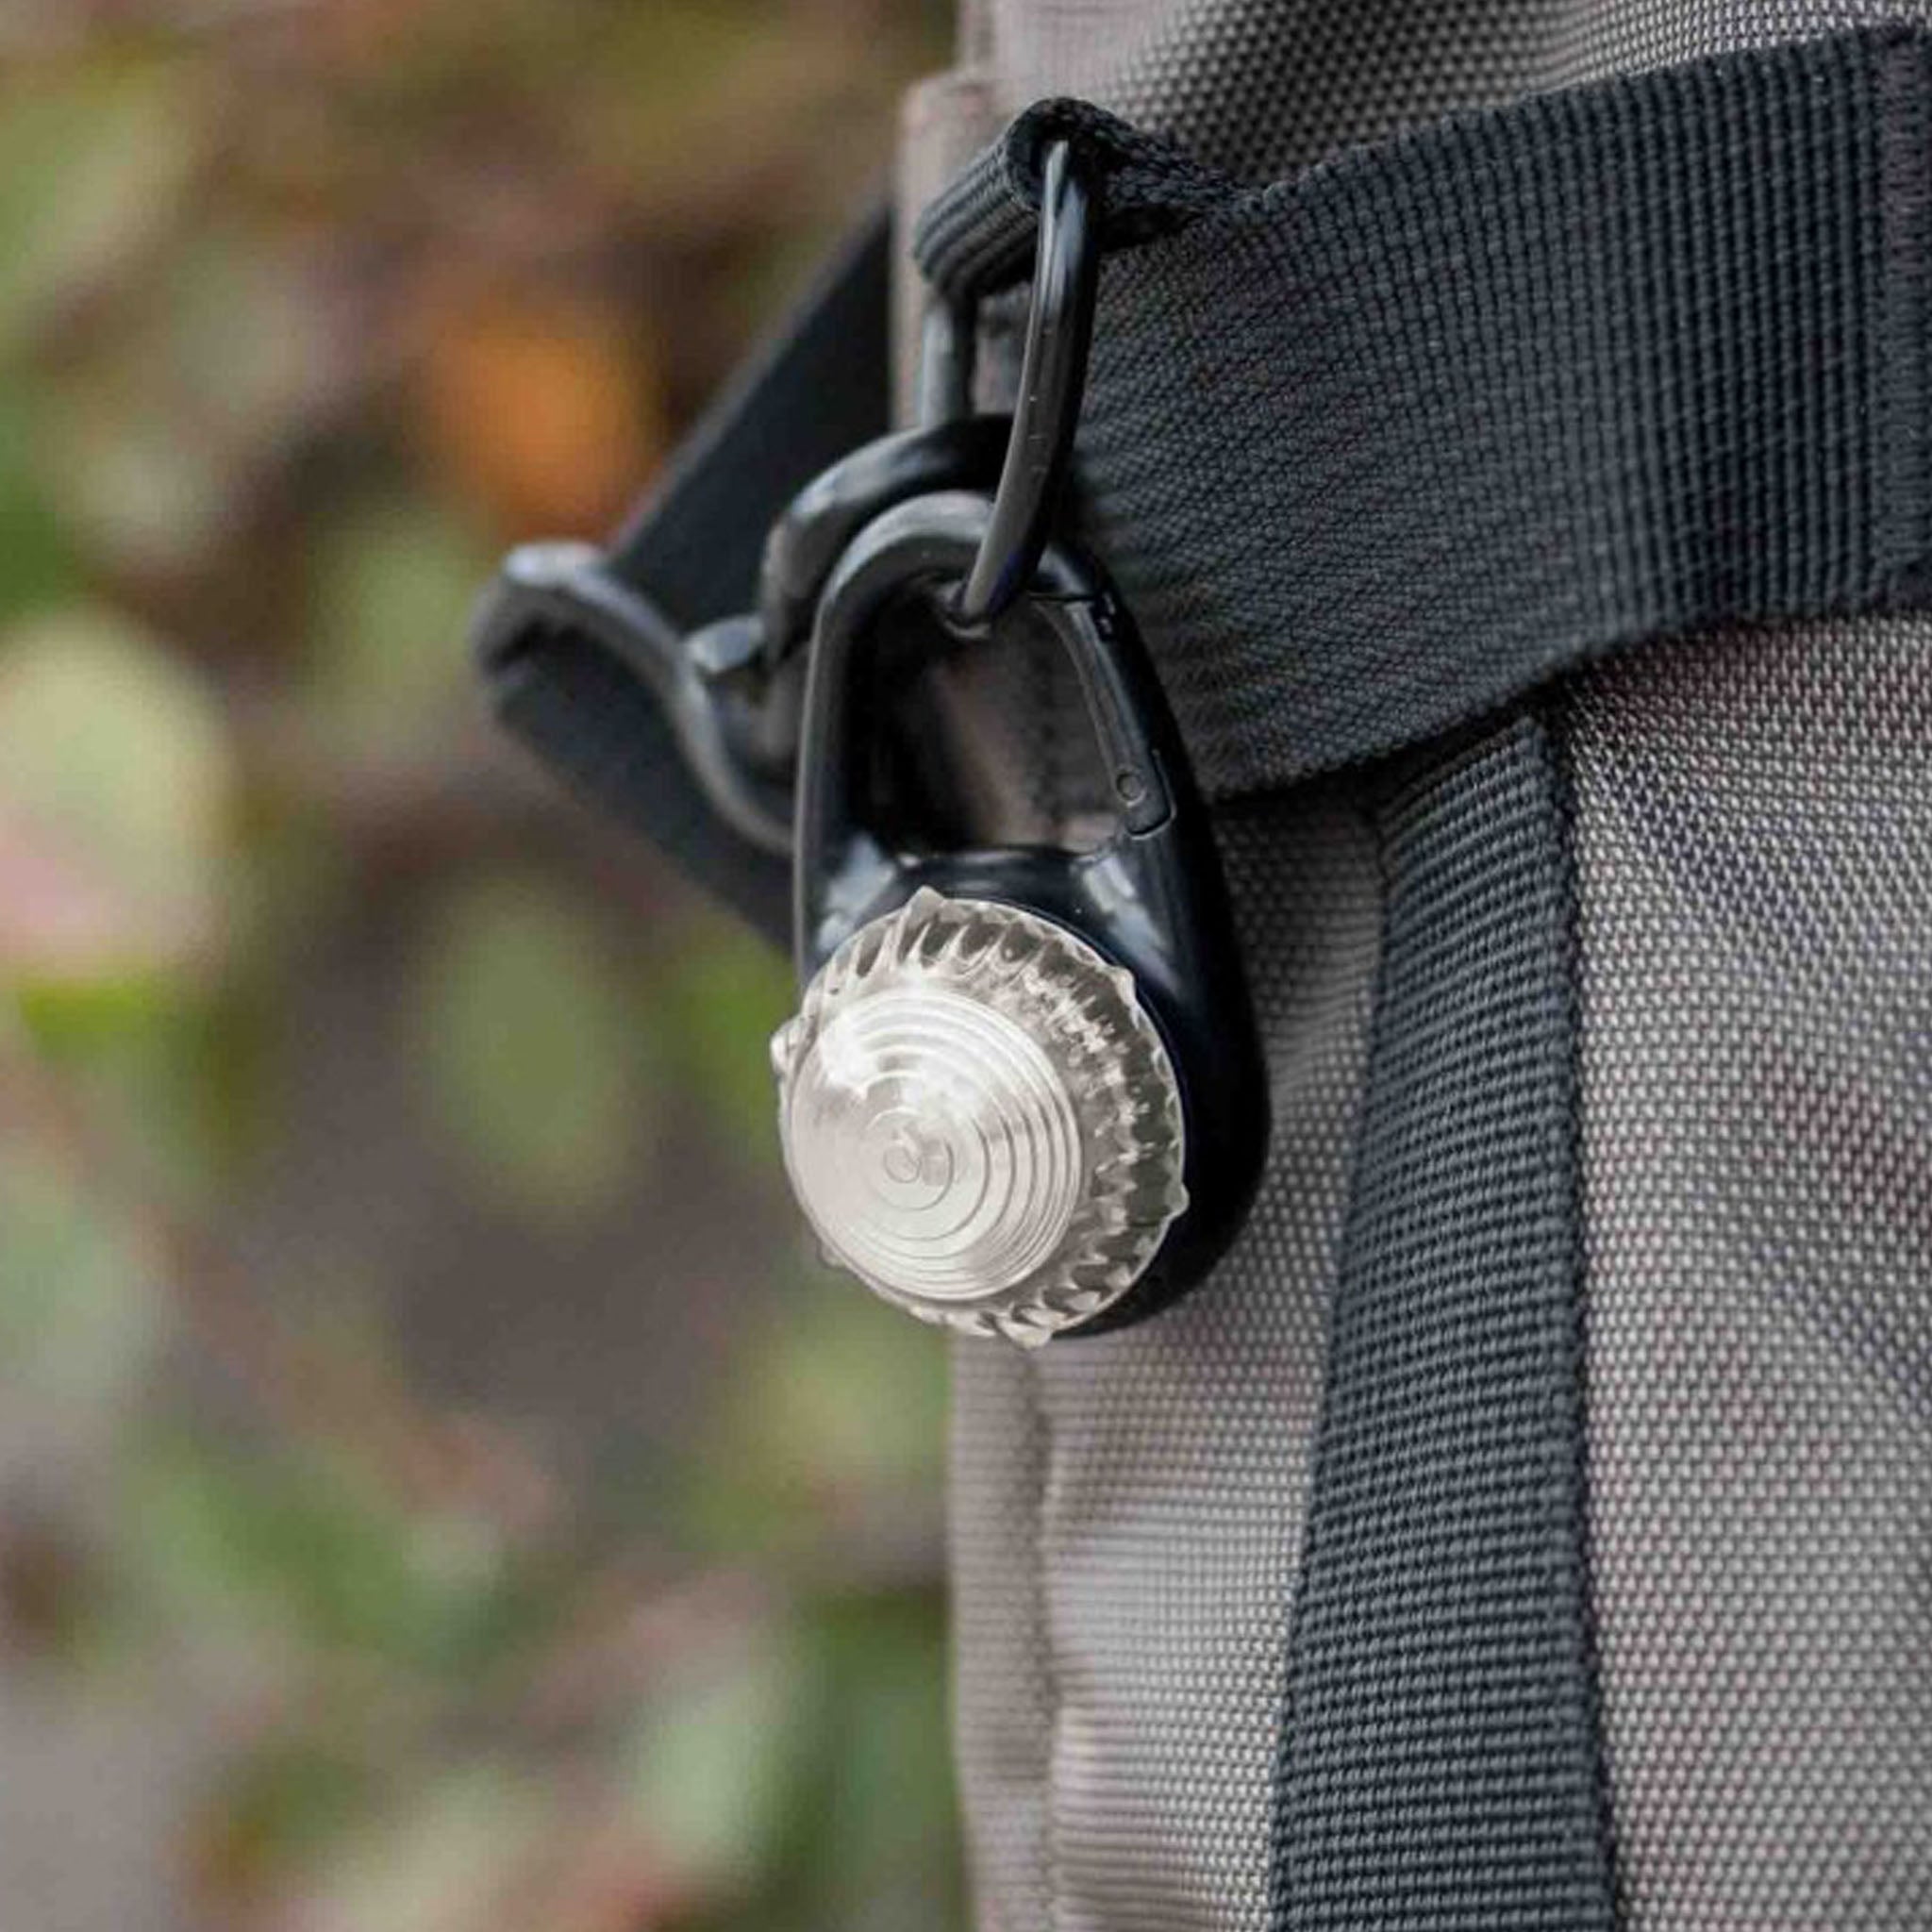 Adventure Tag-It Lights - Clip to a dry bag